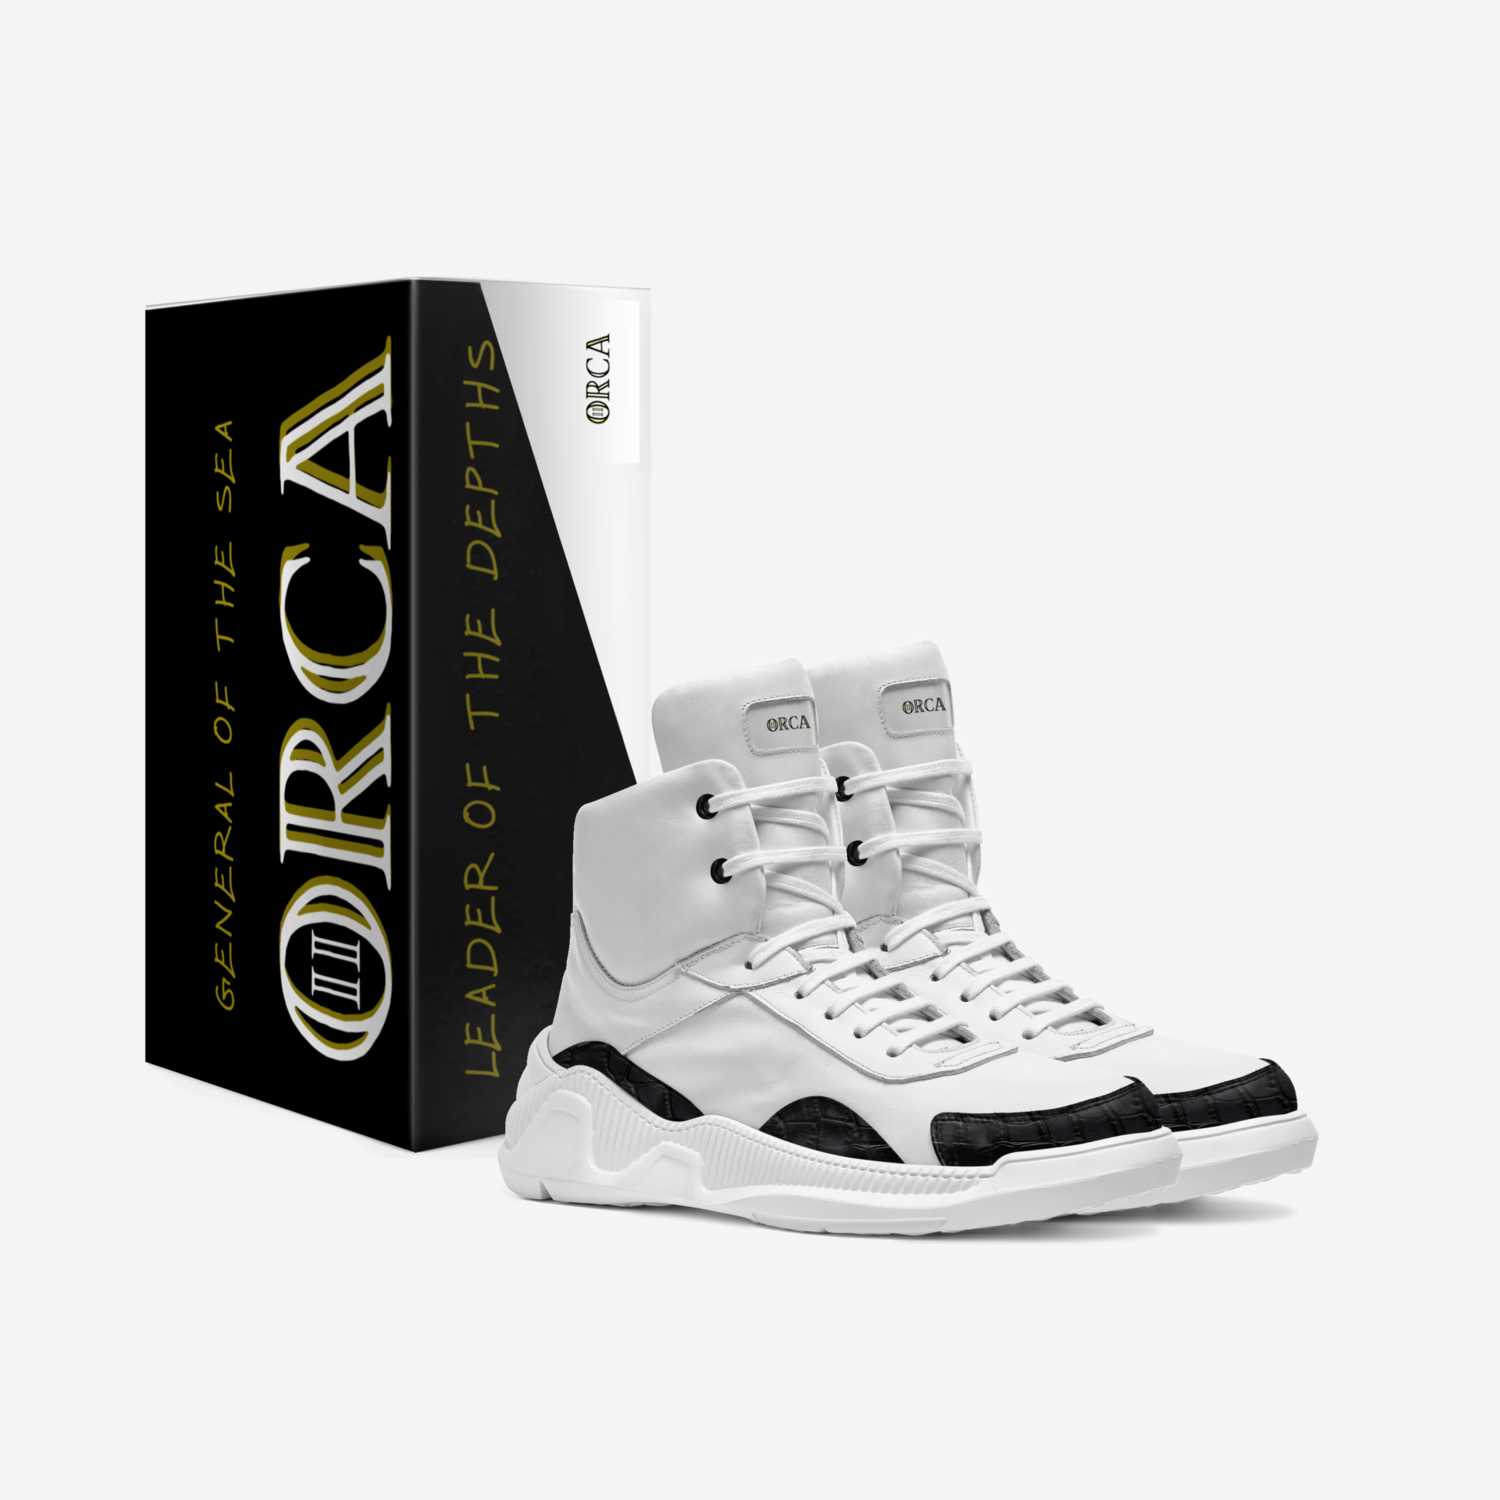 ORCA RISE custom made in Italy shoes by Avrage2savage Luxury | Box view